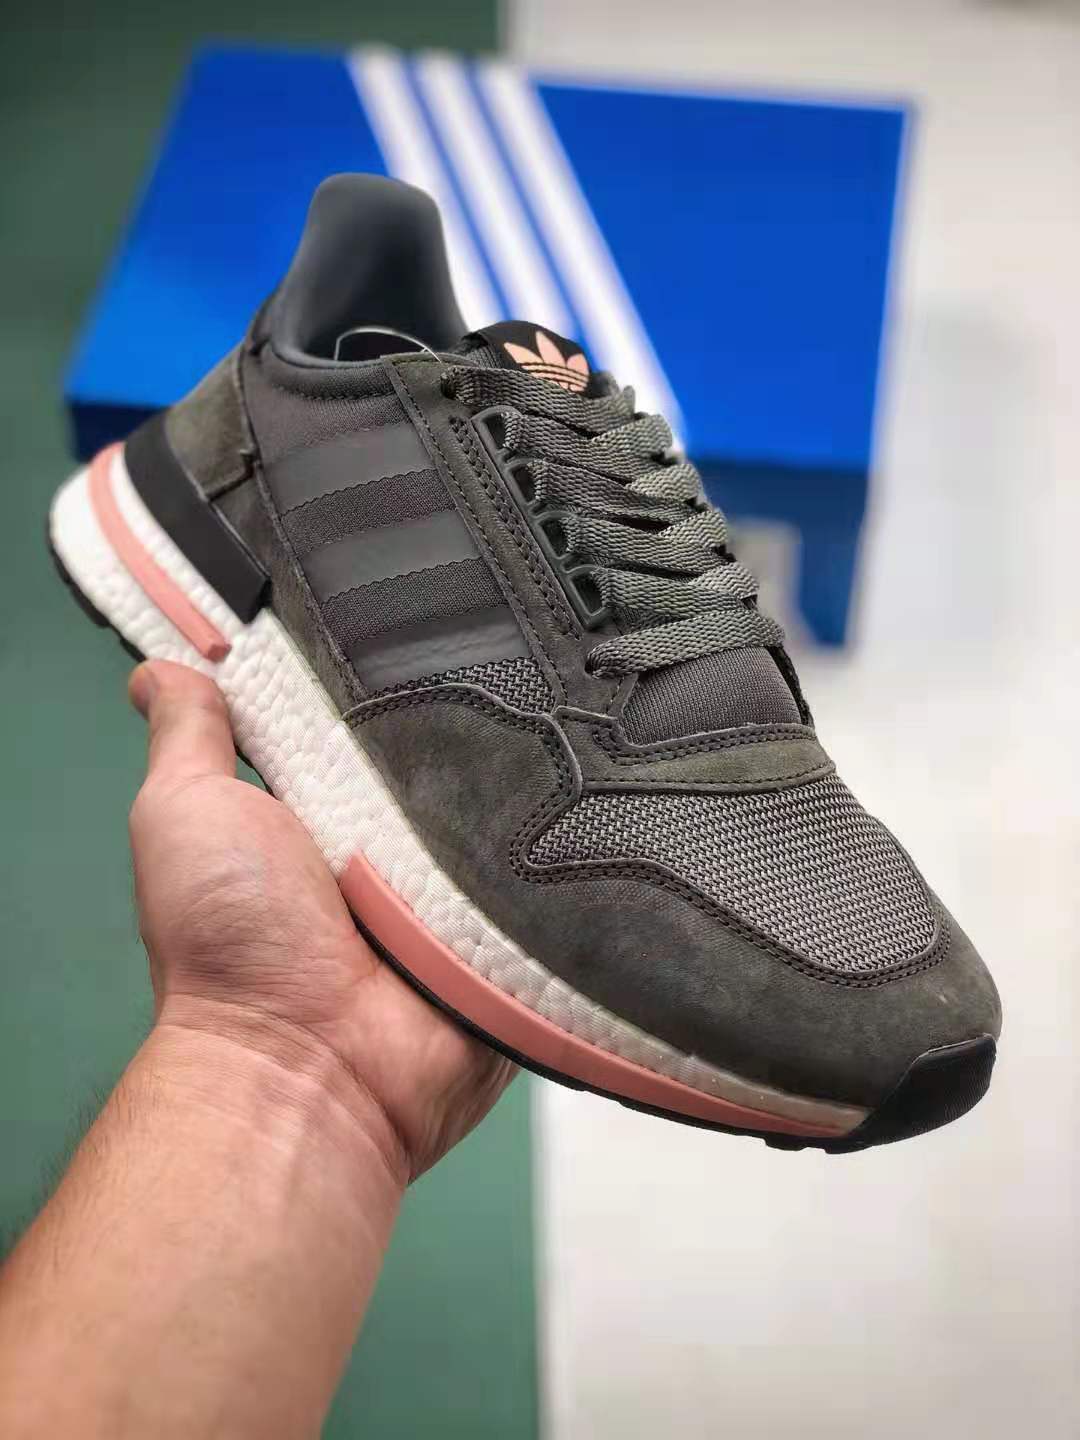 Adidas ZX 500 RM B42217 - Retro-inspired Sneakers for Modern Comfort